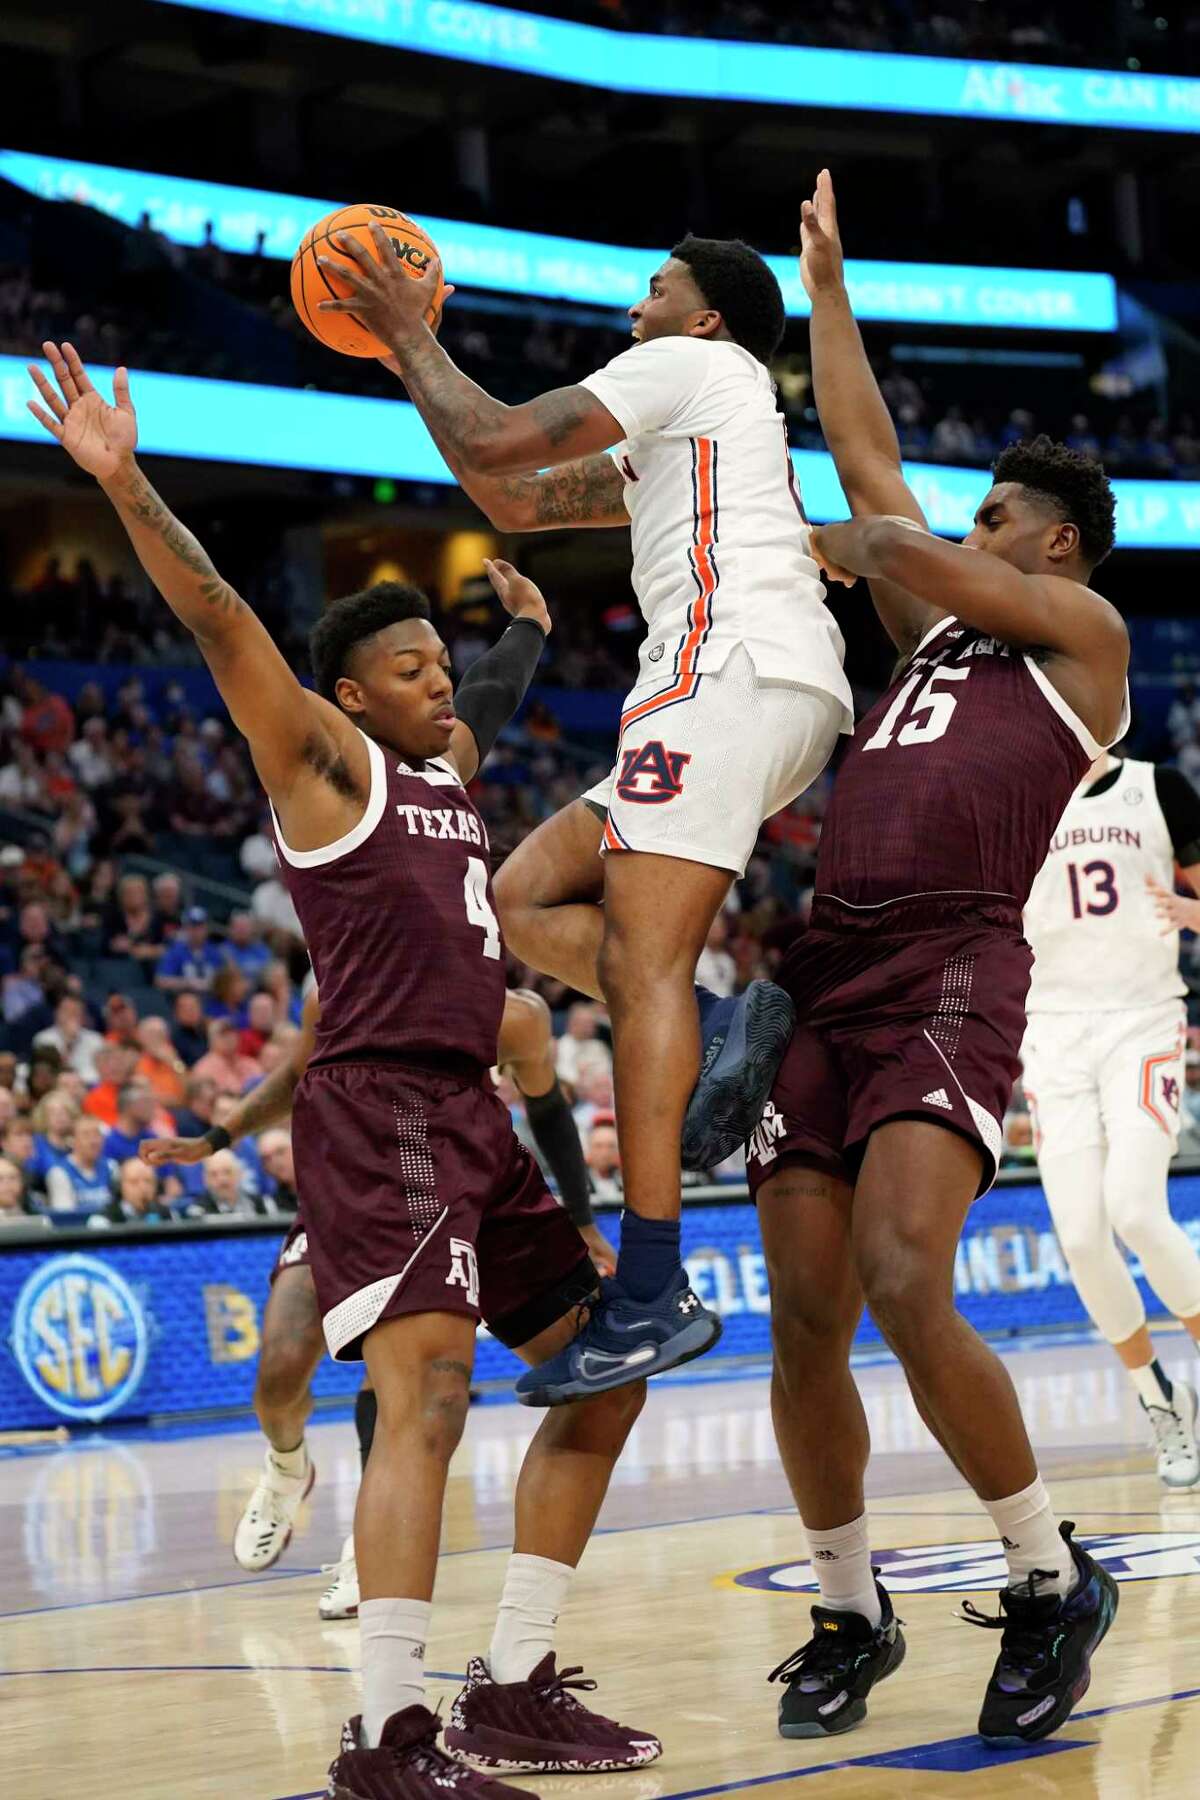 Auburn guard K.D. Johnson (0) puts up a shot betwen Texas A&M guard Wade Taylor IV (4) and forward Henry Coleman III (15) during the first half of an NCAA men's college basketball Southeastern Conference tournament game Friday, March 11, 2022, in Tampa, Fla. (AP Photo/Chris O'Meara)